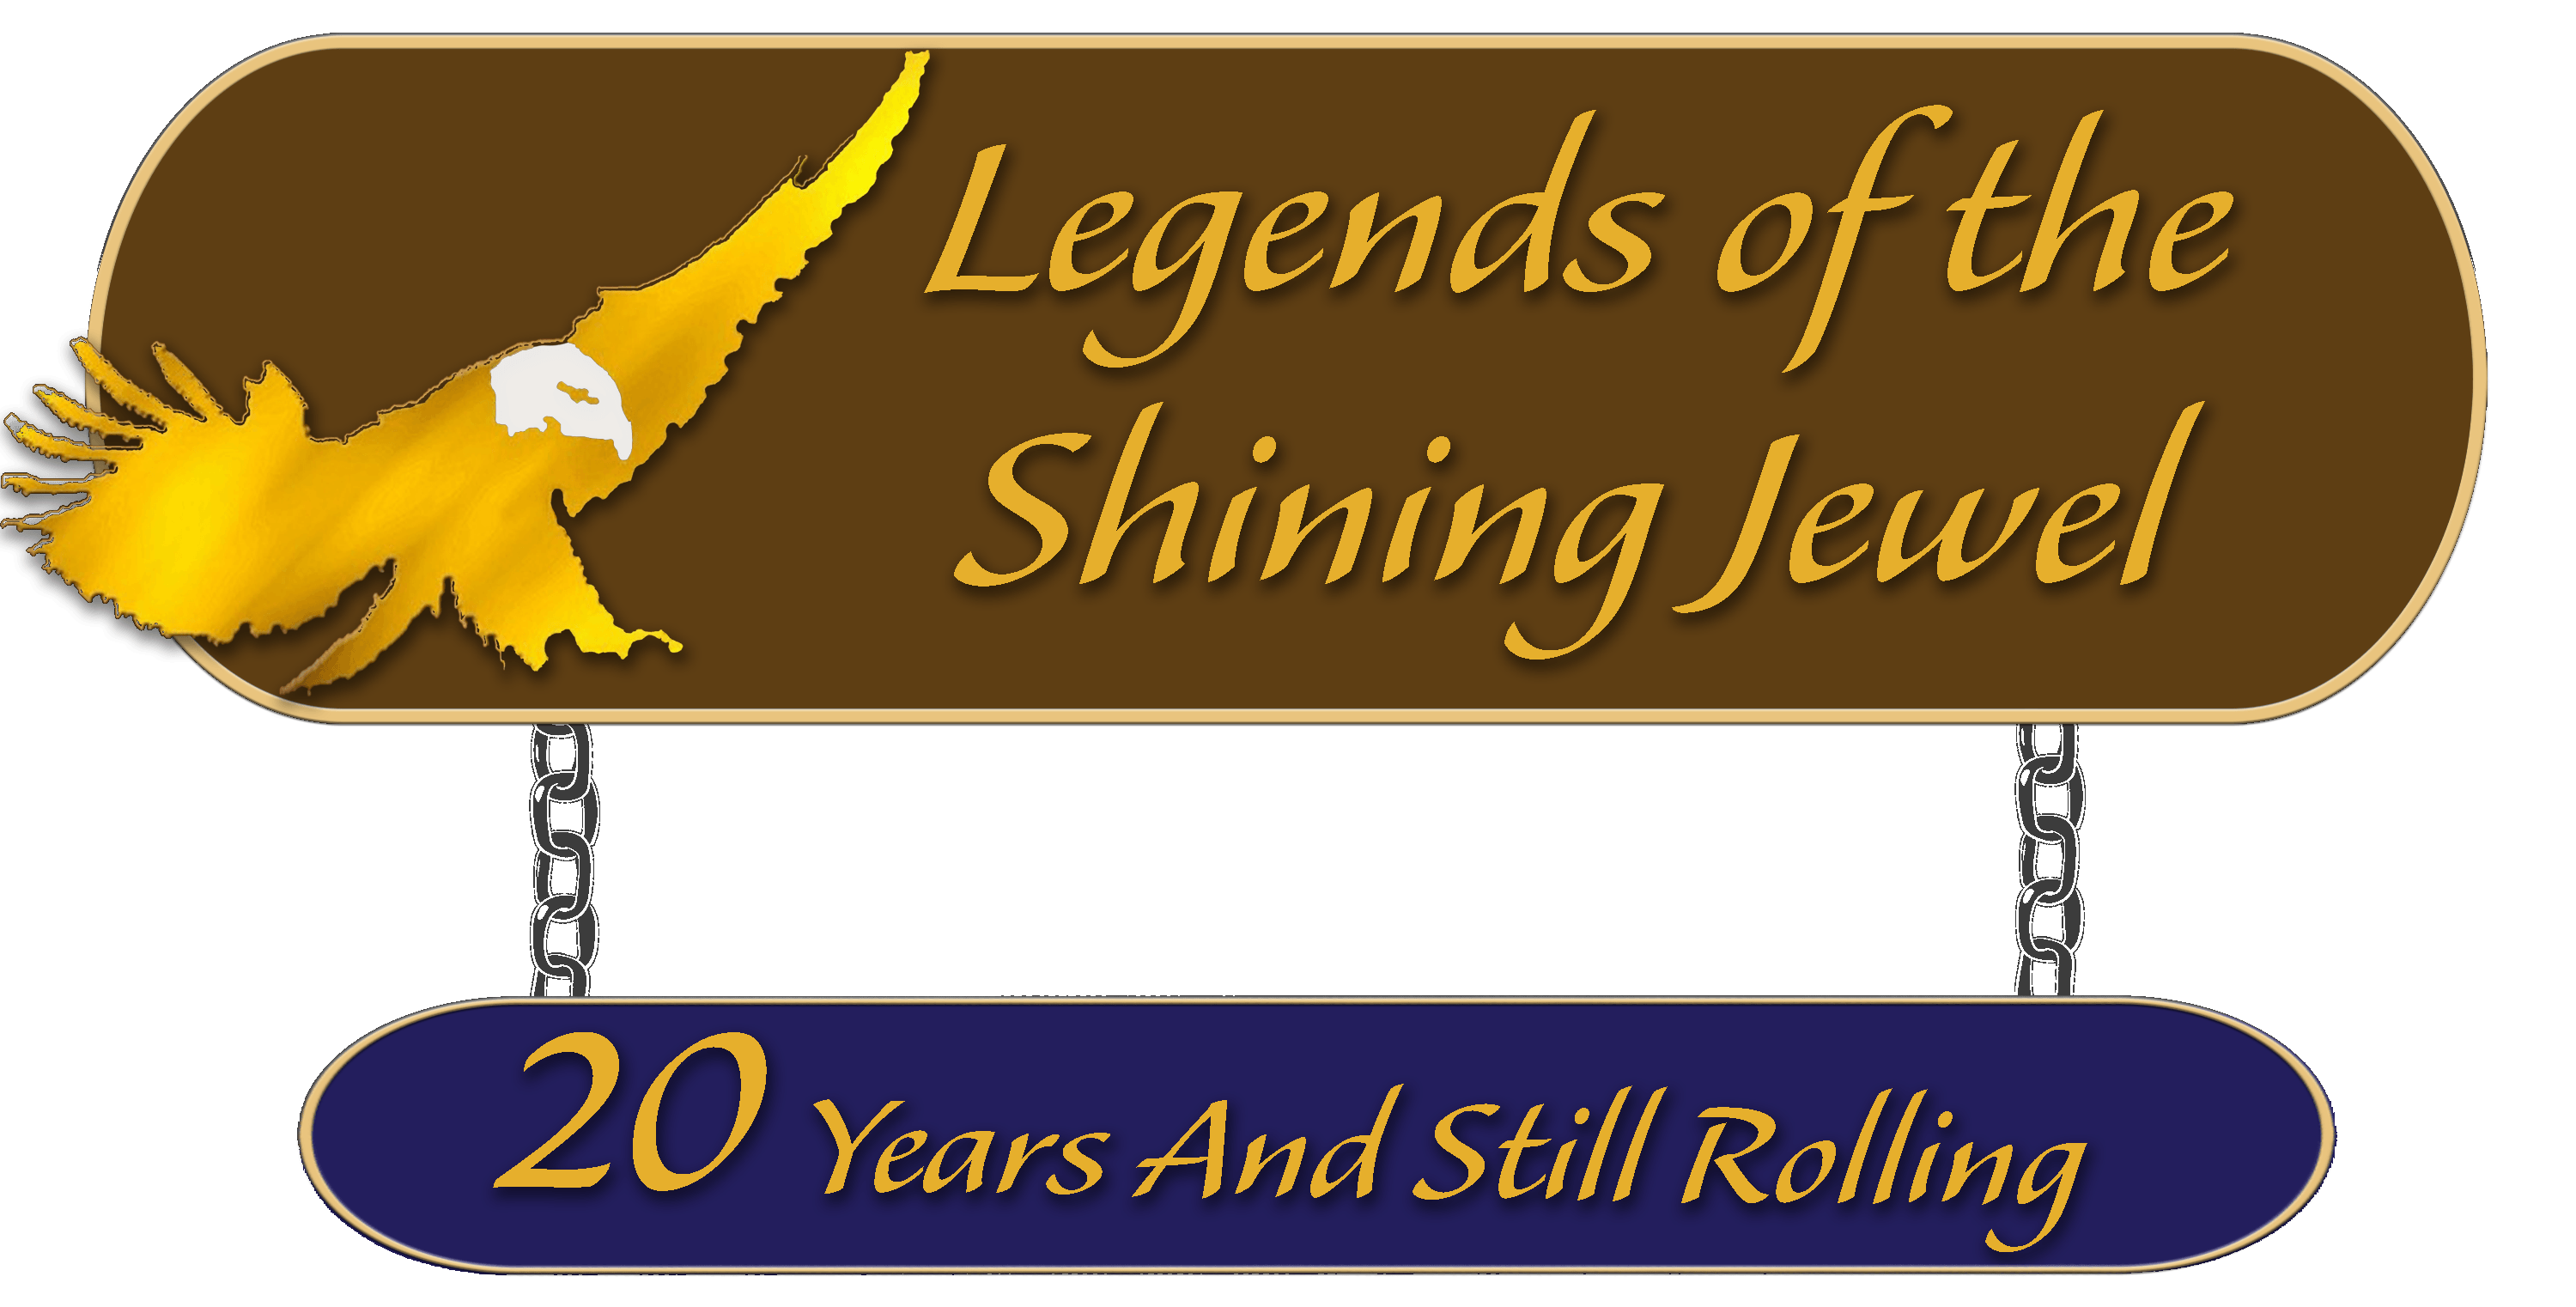 Legends of the Shining Jewel